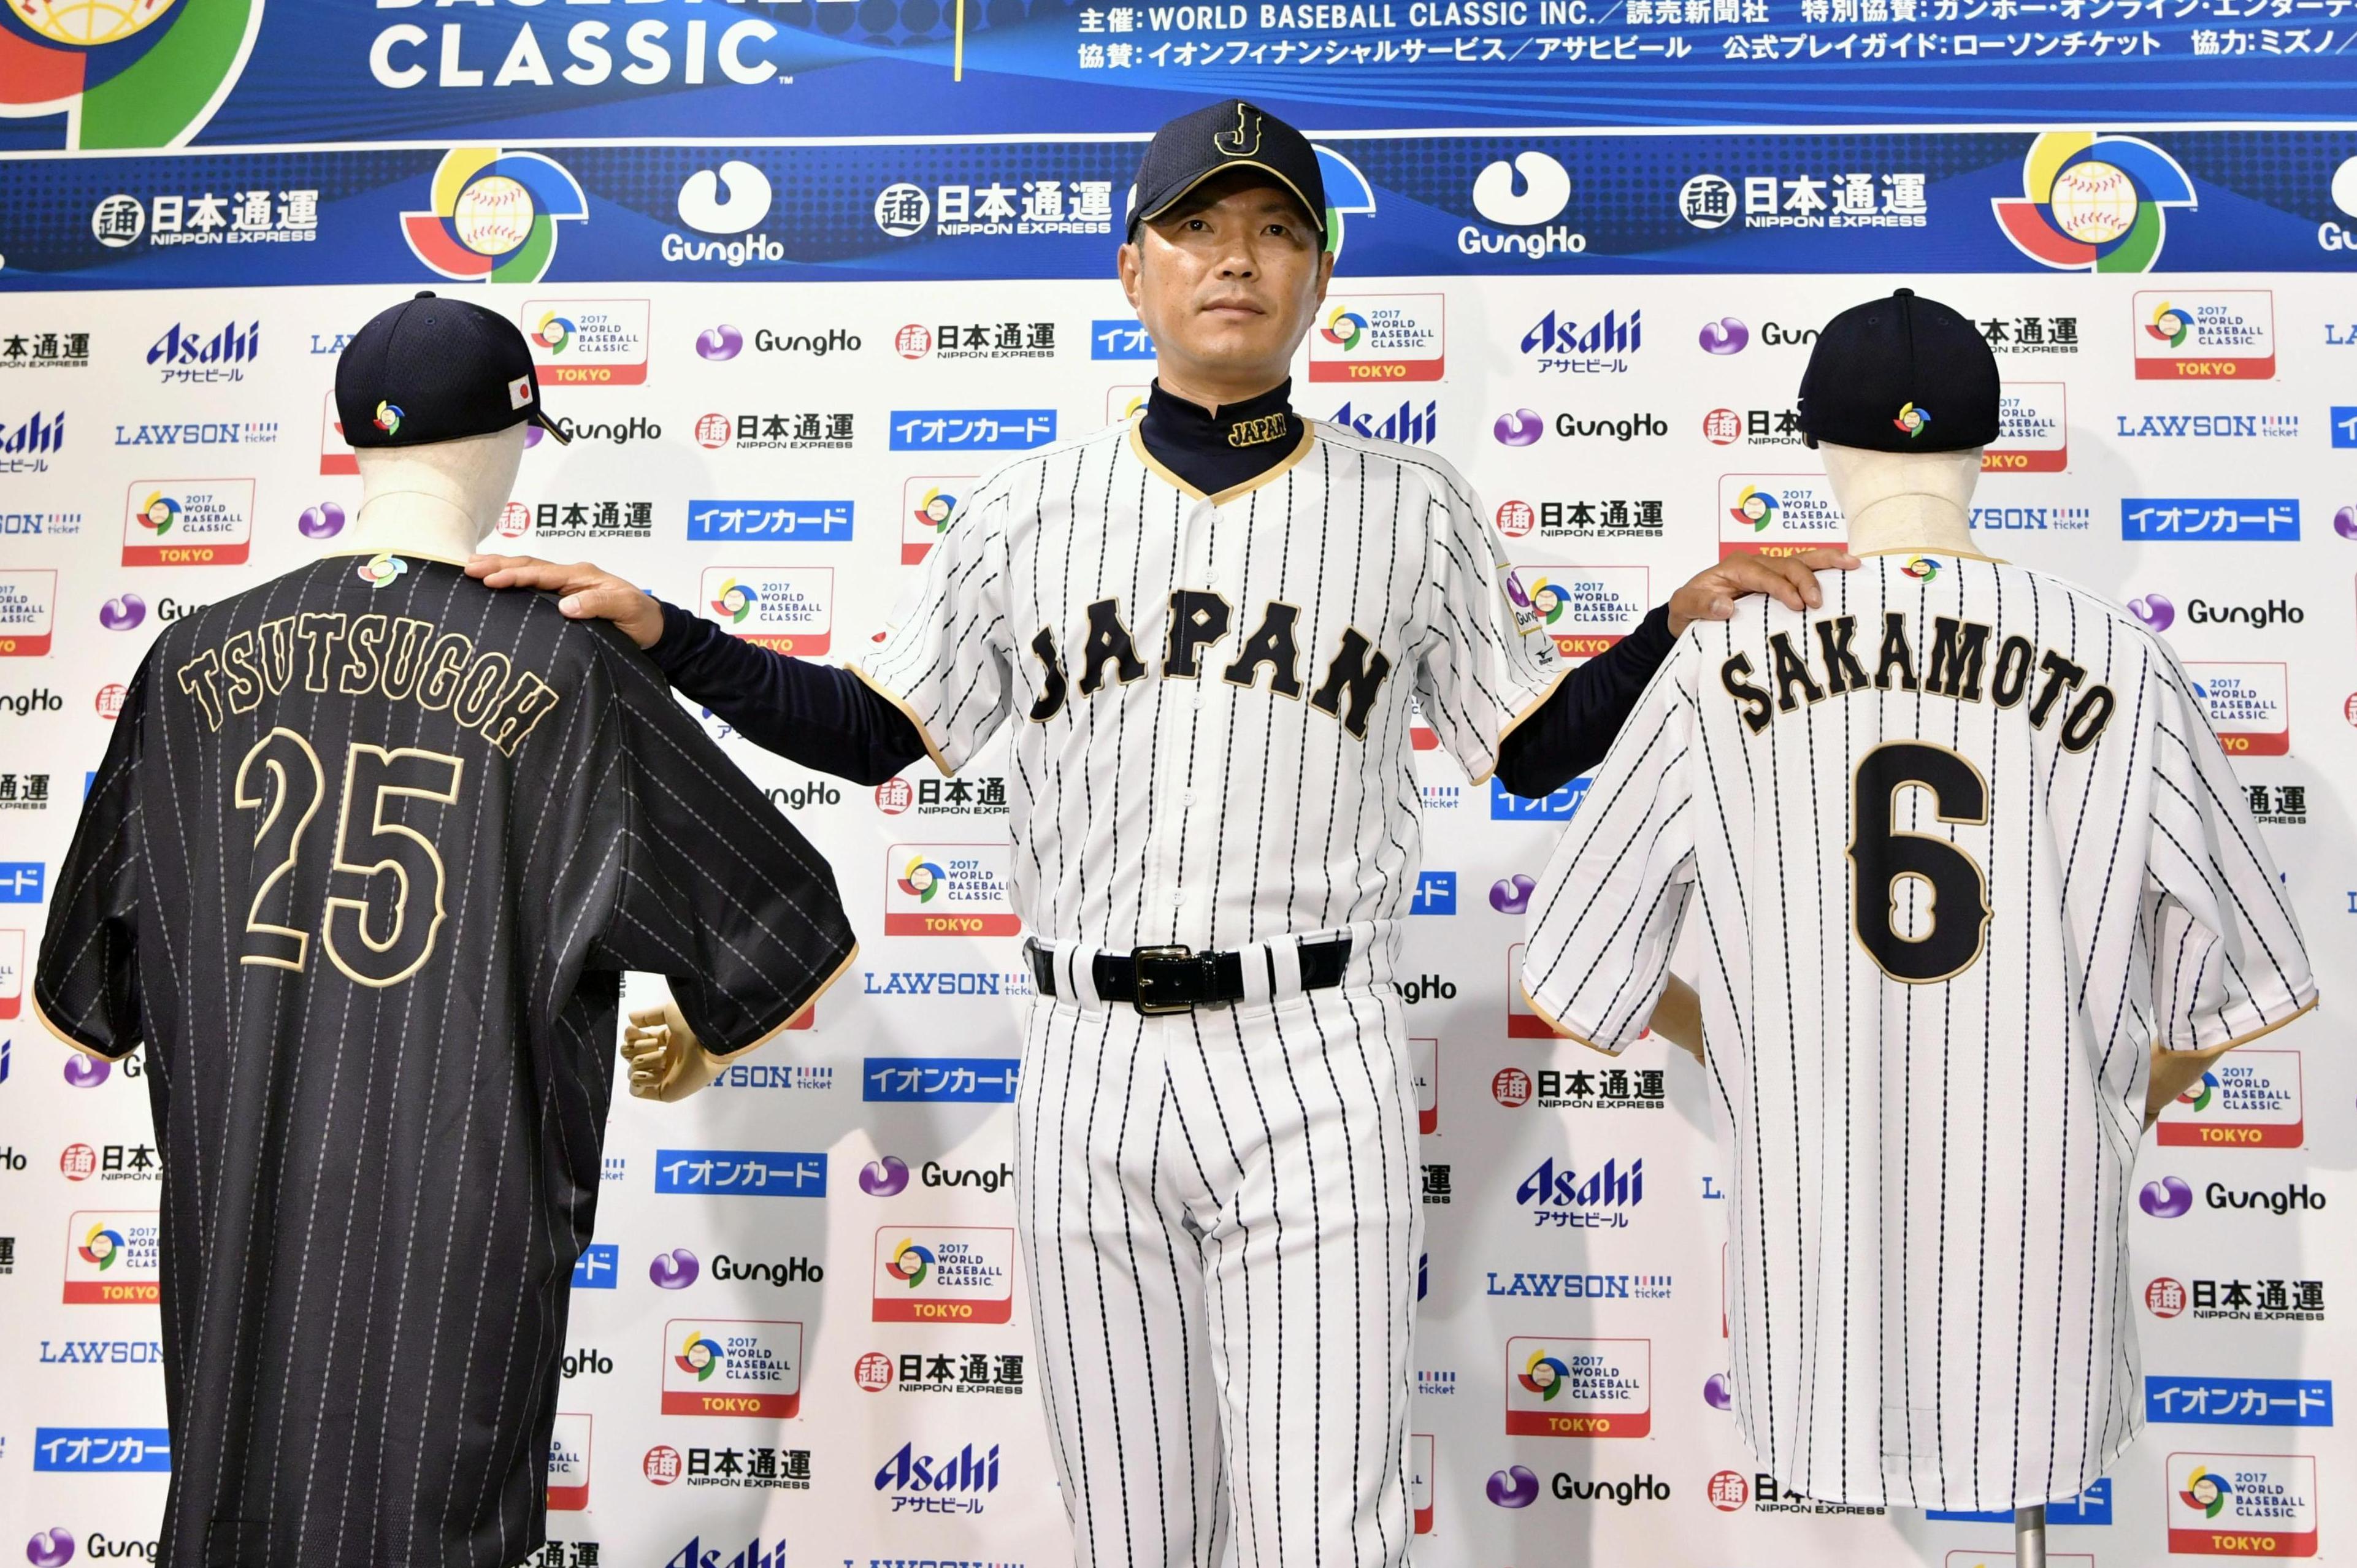 Samurai Japan skipper Kokubo promotes team's new uniforms for WBC, stays  mum about roster - The Japan Times